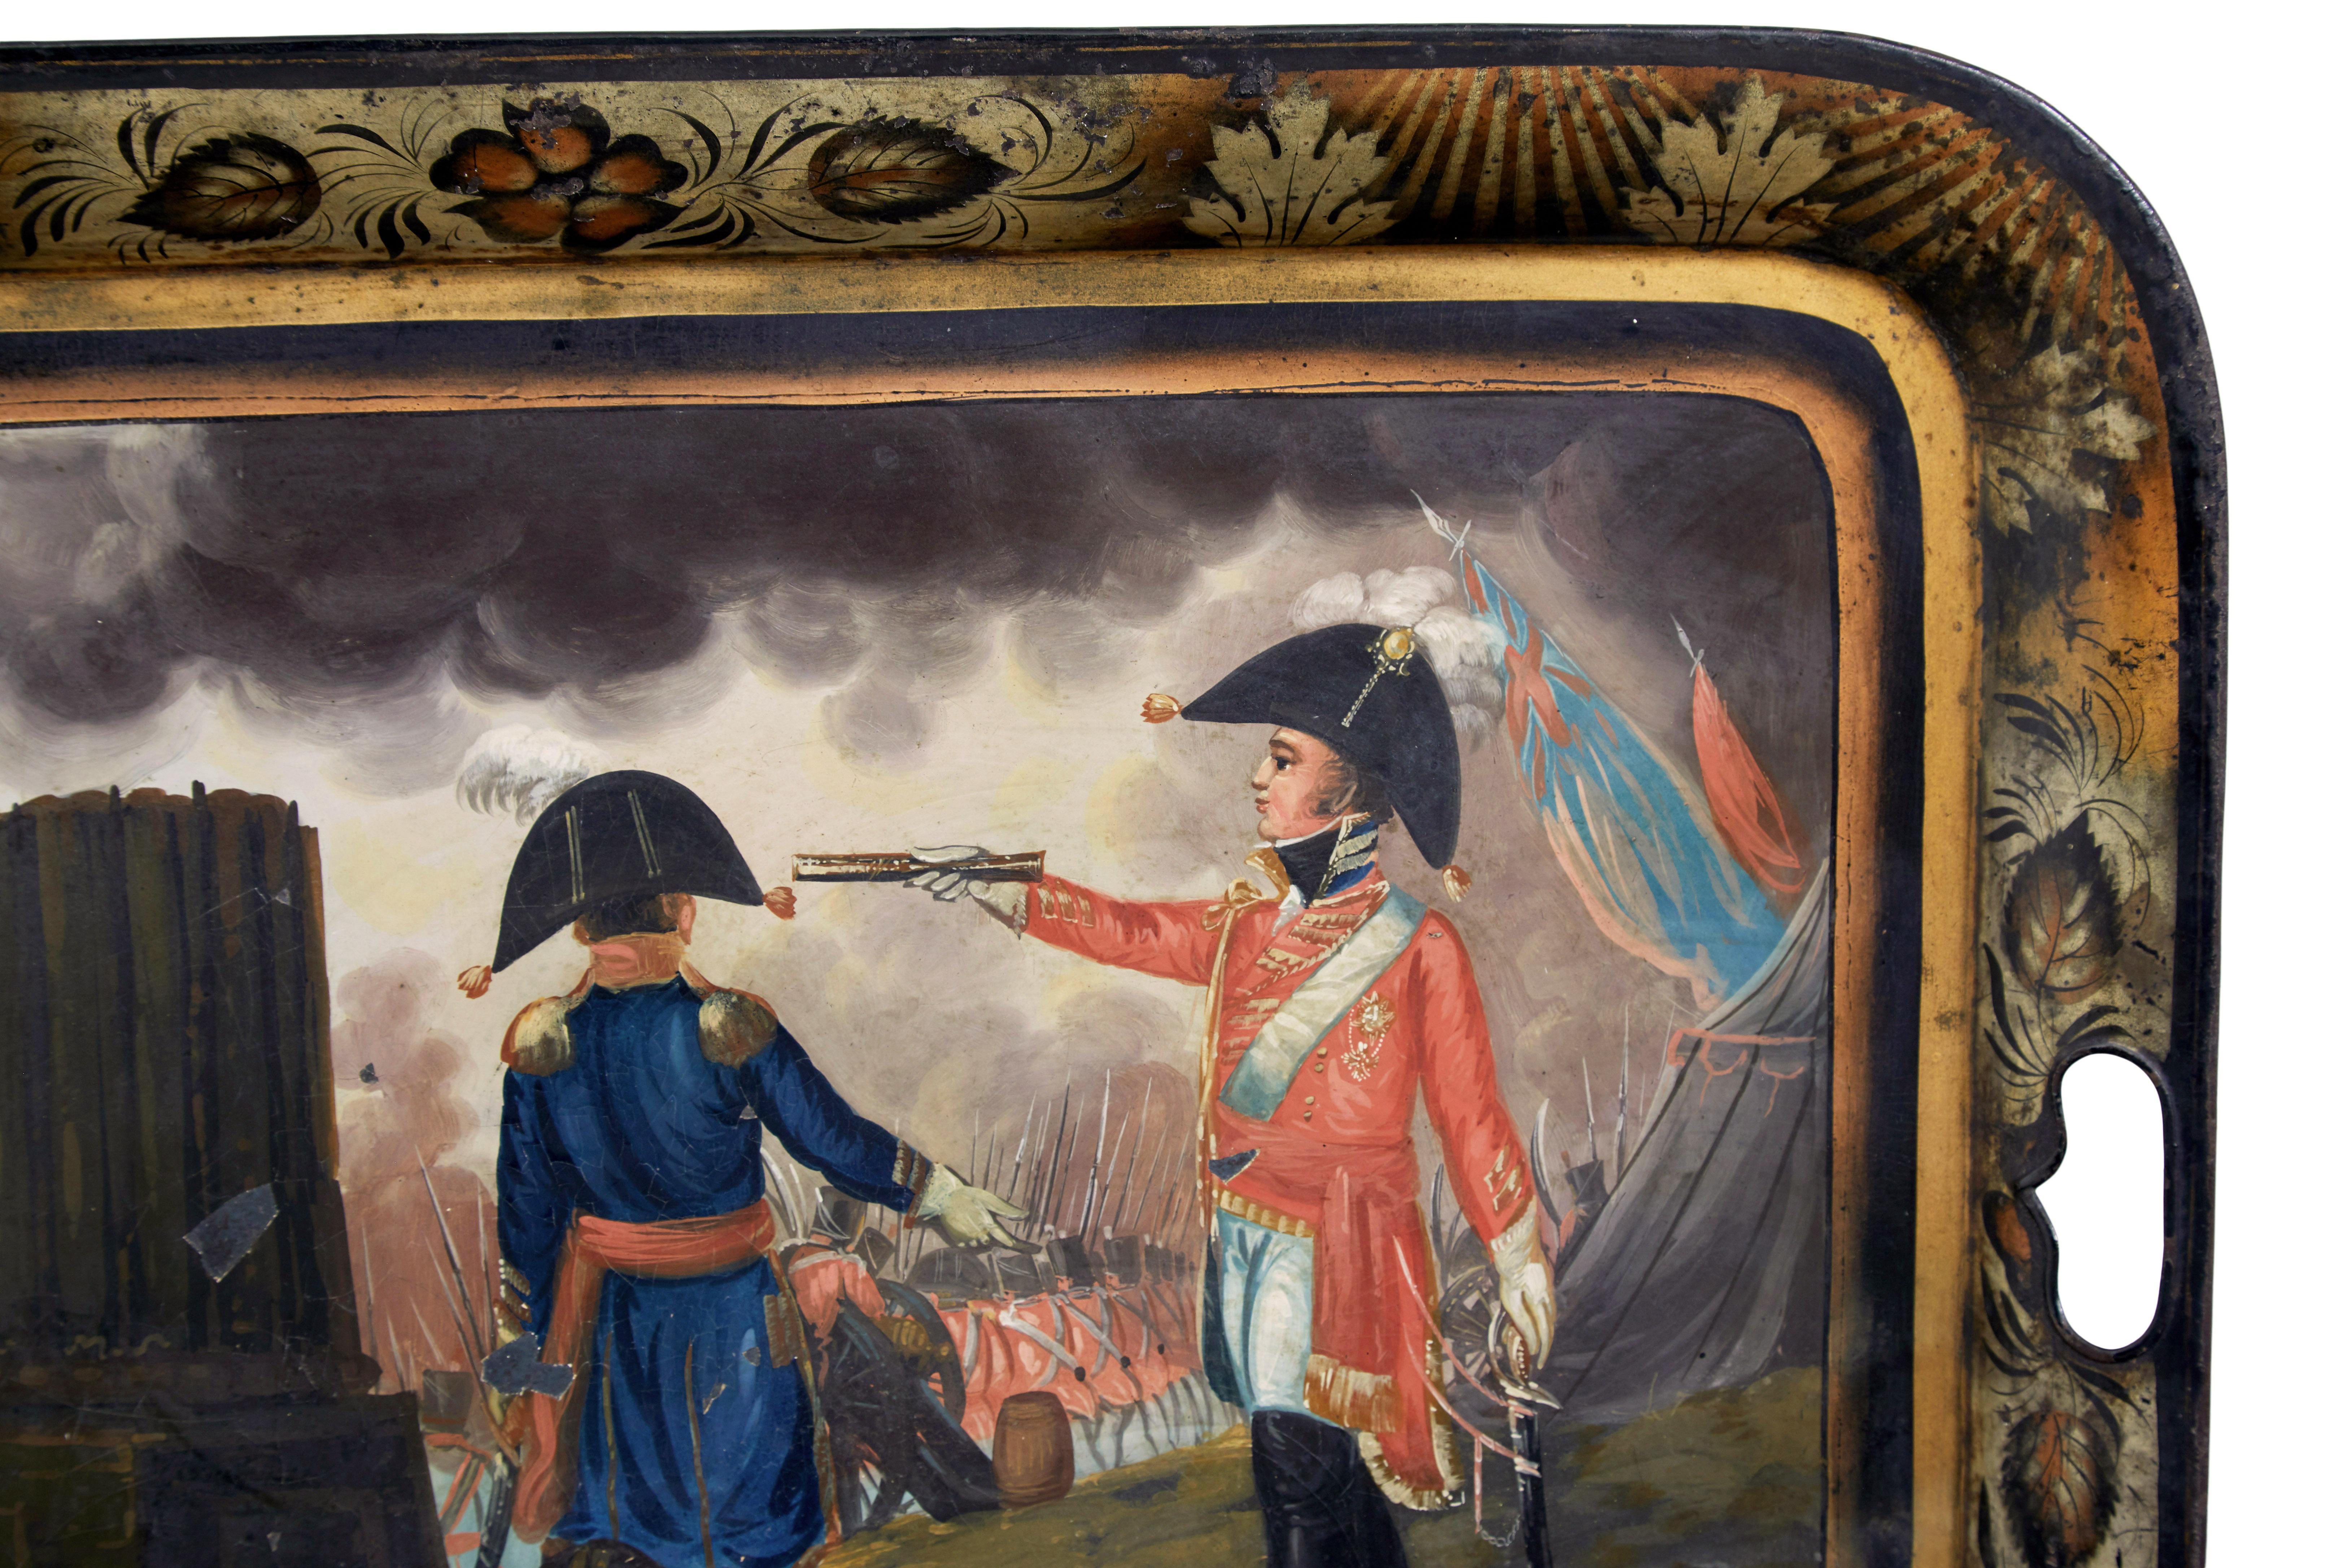 19th century toleware tray battle of waterloo circa 1890.

We are pleased to offer this unique hand painted decorative tray, which shows a fictitious scene between napoleon boneparte and the duke of wellington at the battle of waterloo.

Rectangular